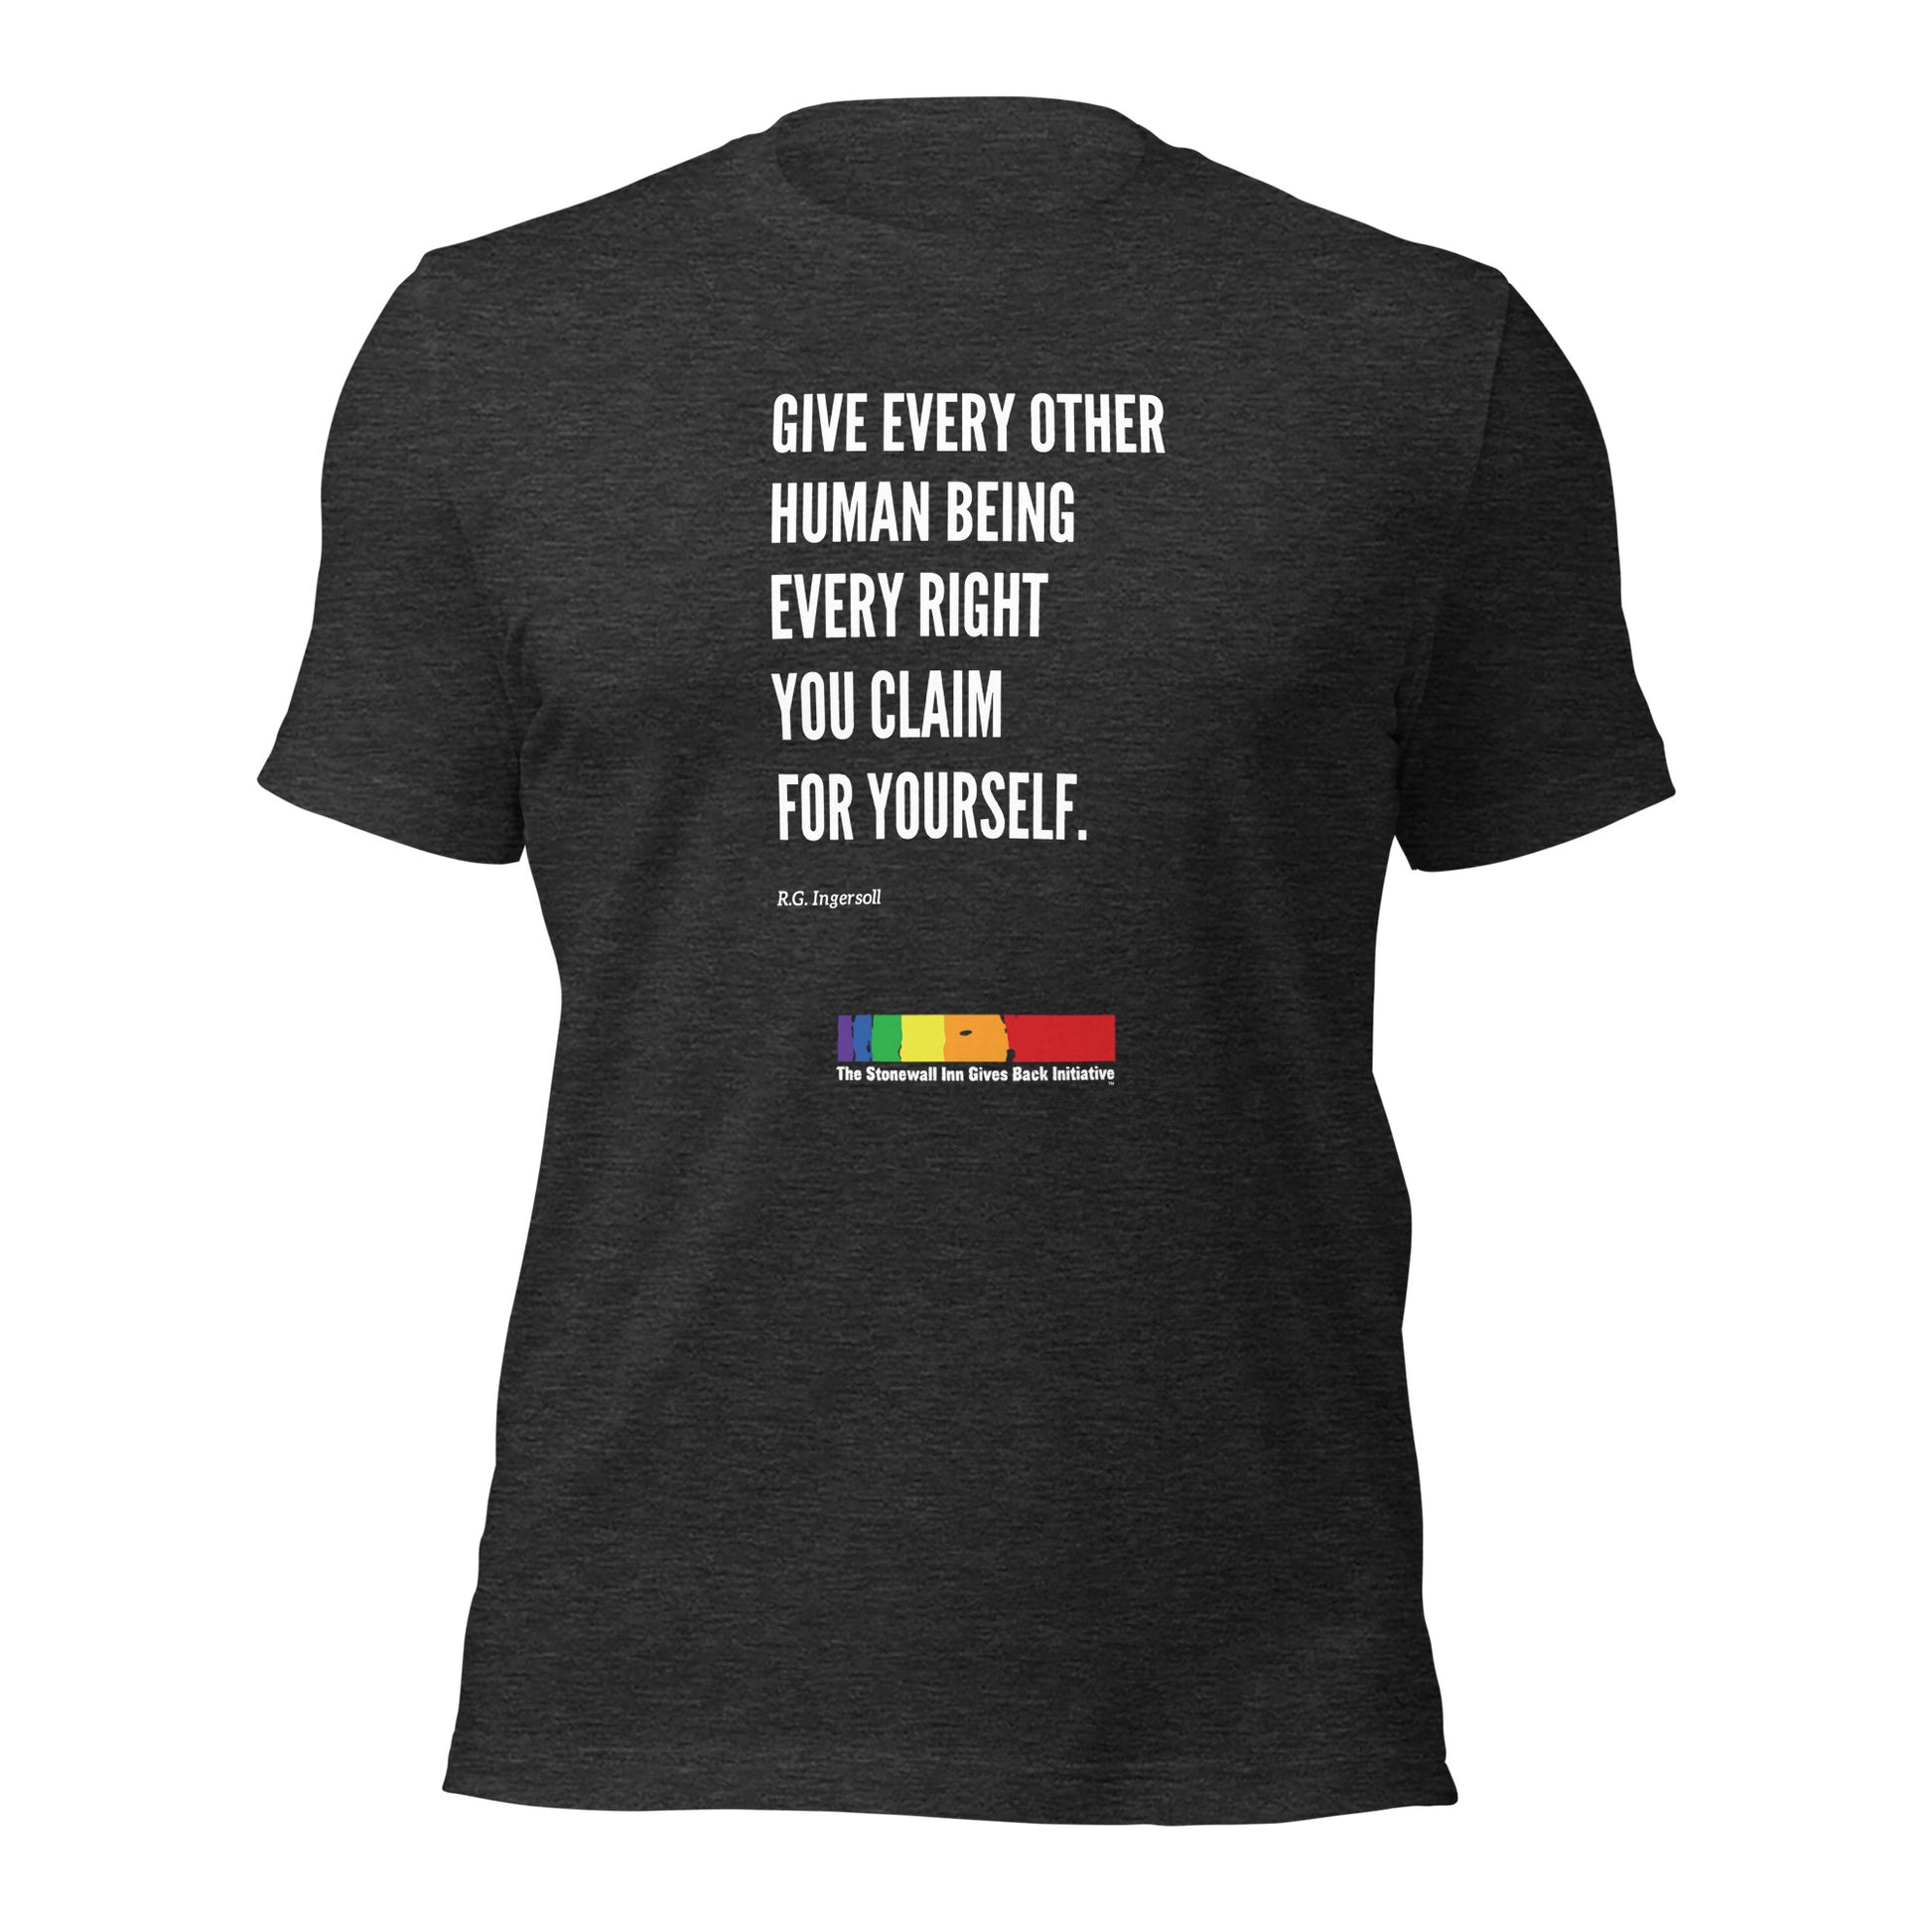 "Give Every Other Human Being Every Right You Claim For Yourself" LGBTQ+ Support short sleeve tee in Heather Grey